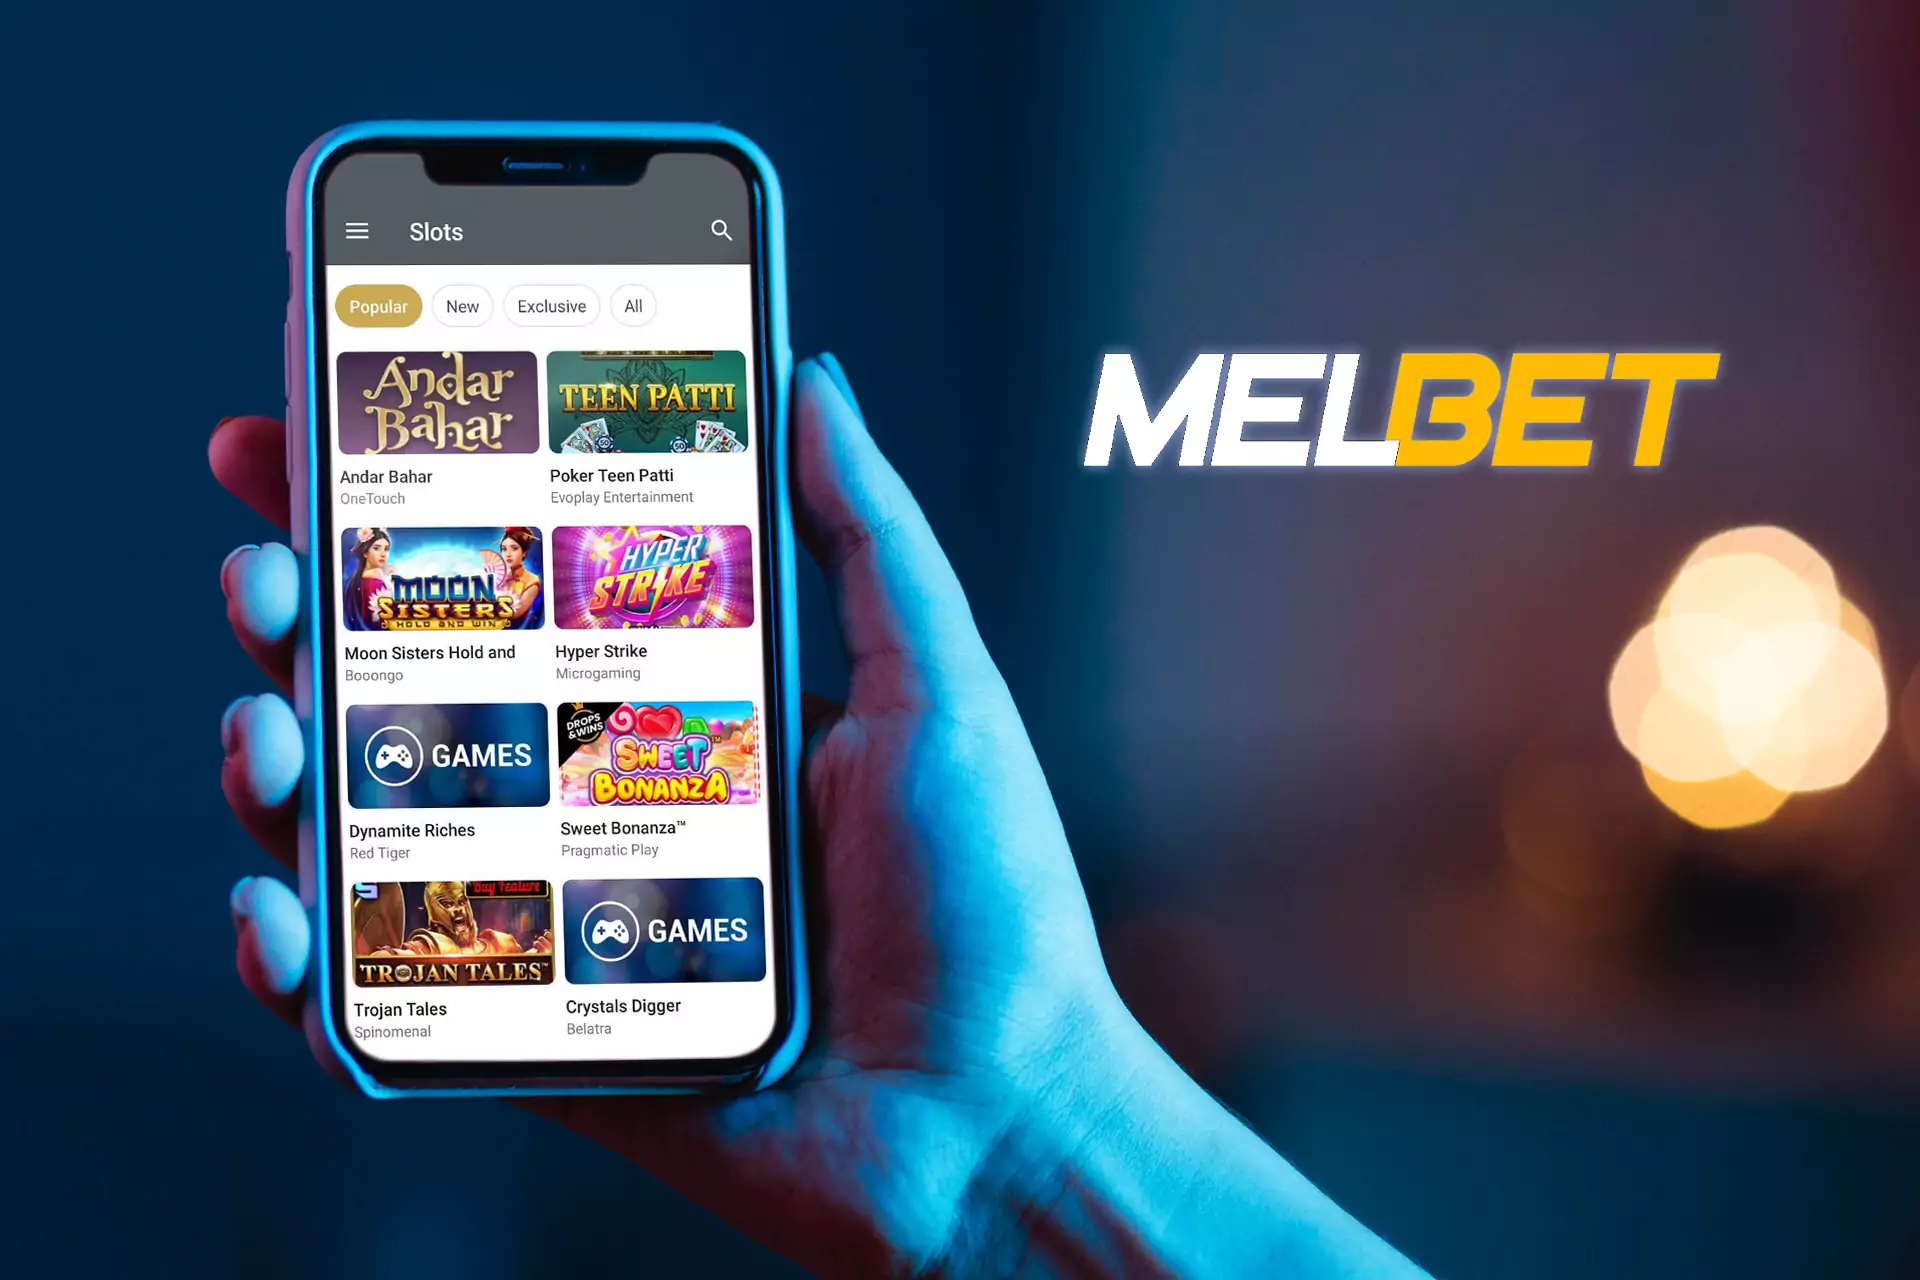 The Melbet Casino suggests new users a really generous welcome bonus of up to 125000 INR.